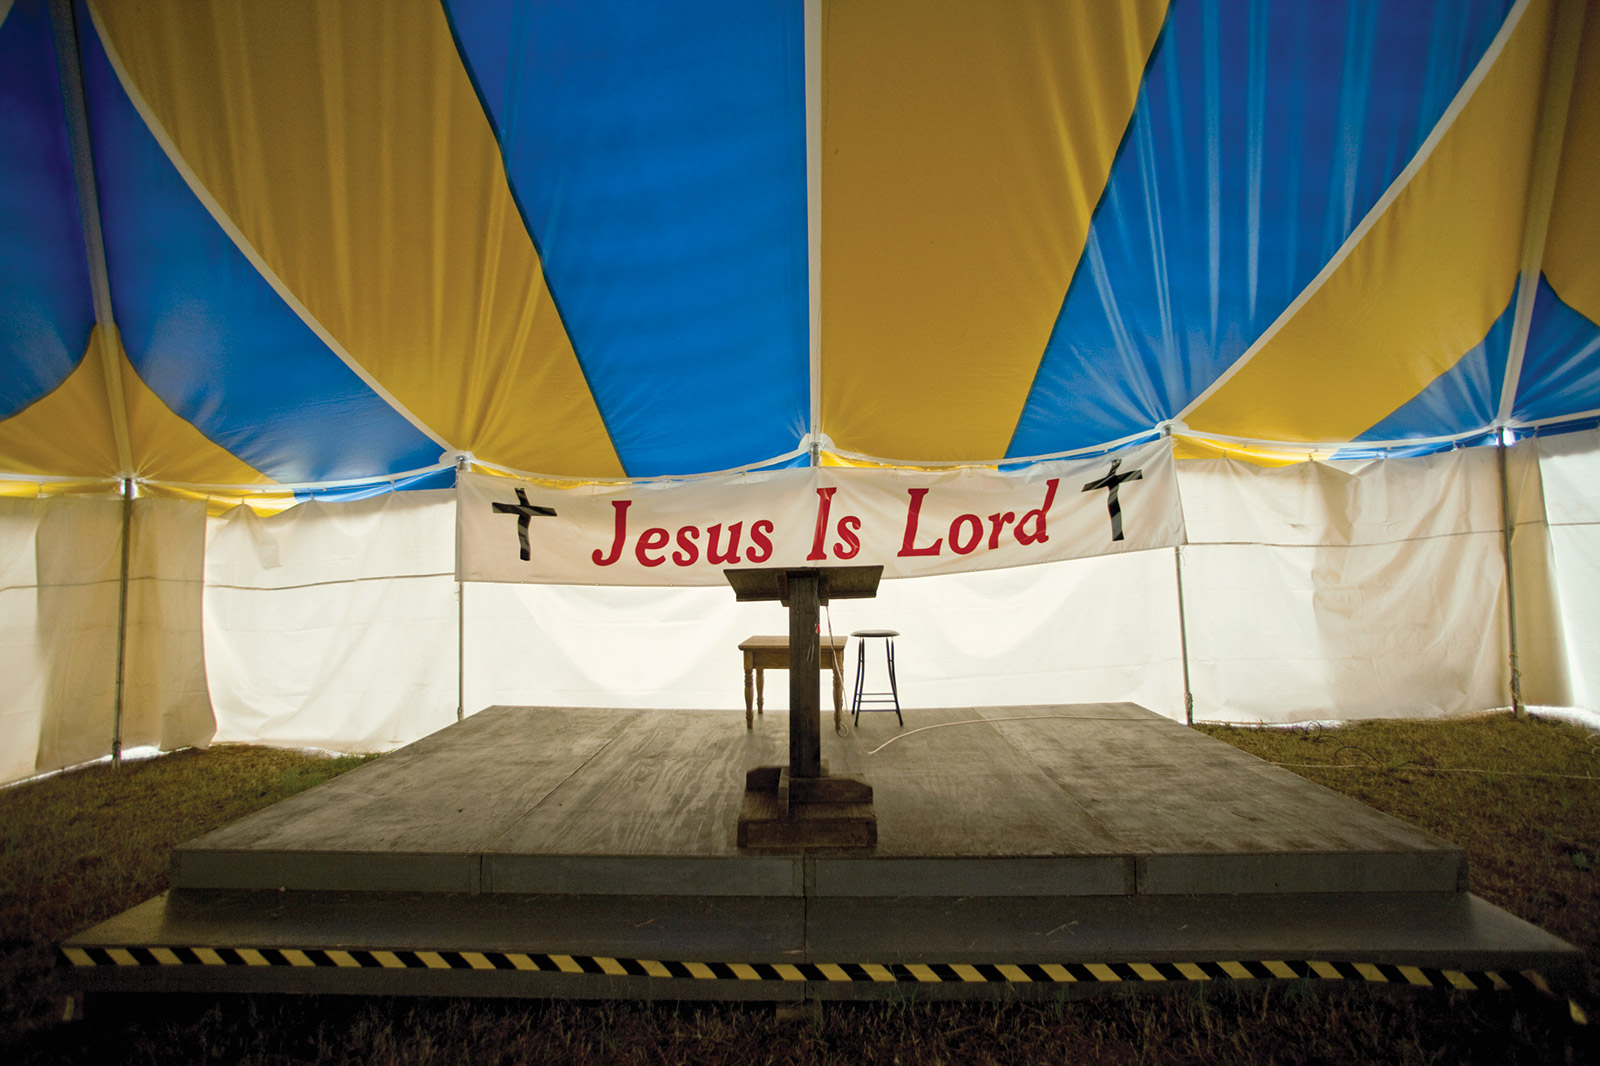 006_jesus_is_lord